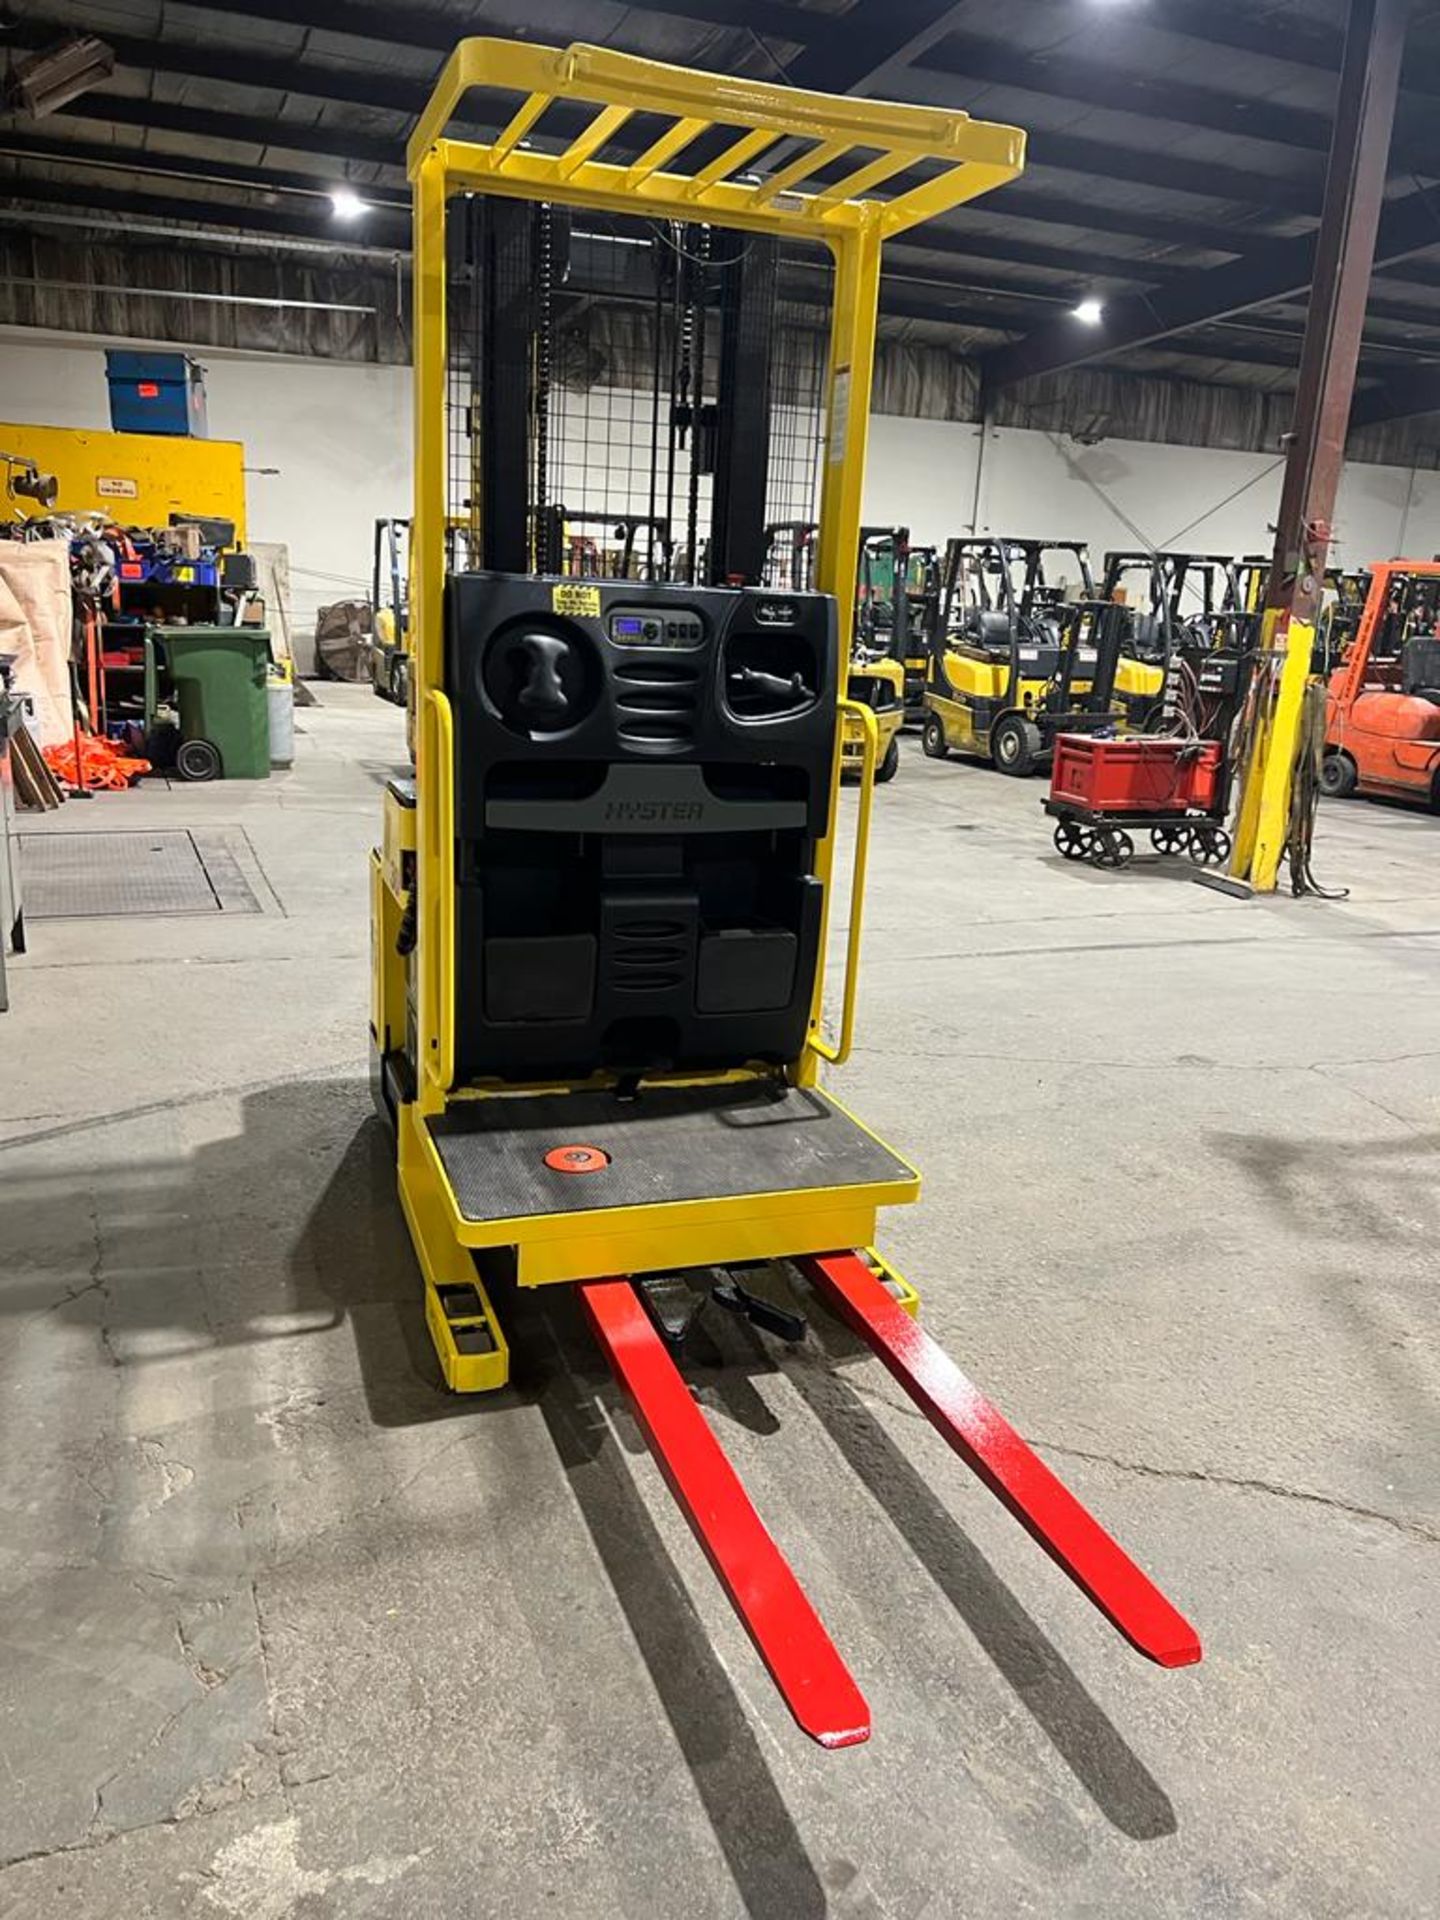 2015 Hyster Order Picker 3000lbs capacity electric Powered Pallet Cart 24V battery - FREE CUSTOMS - Image 4 of 5